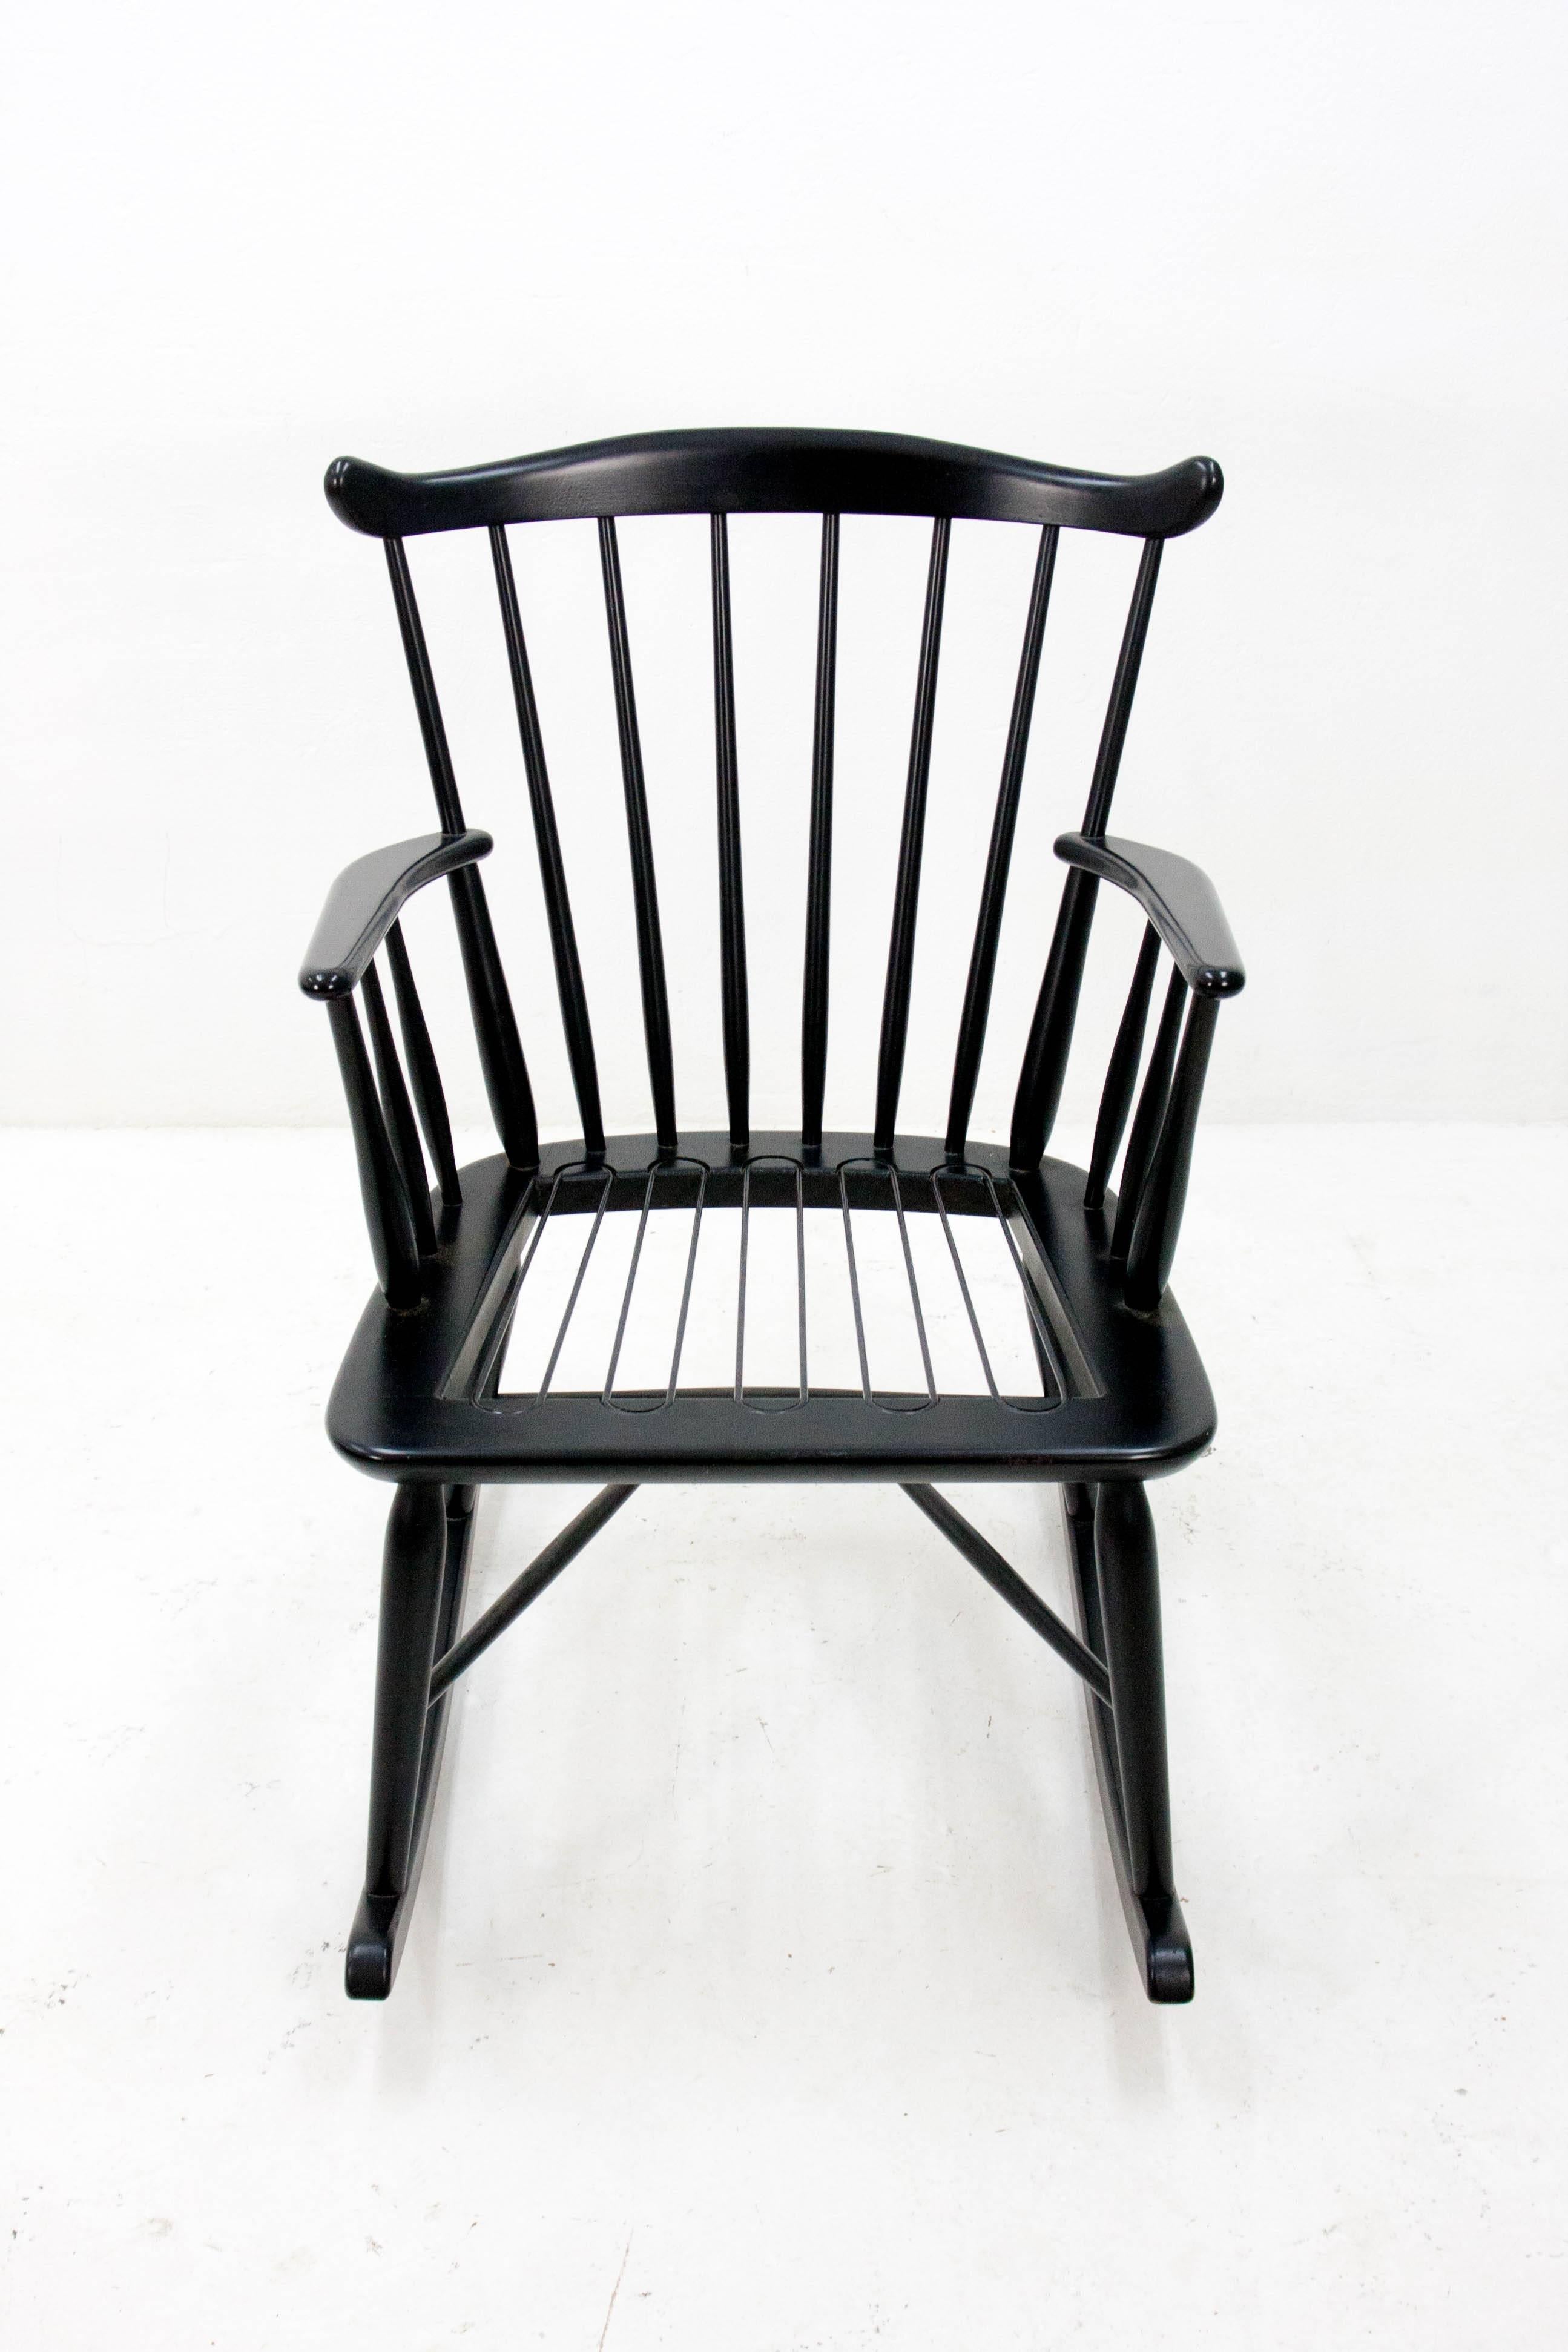 1950s Danish rocking chair designed by Borge Mogensen for FDB Møbler. Solid beech frame in black painted finish. This rocking chair is in very nice sturdy condition and includes the original seat cushion.